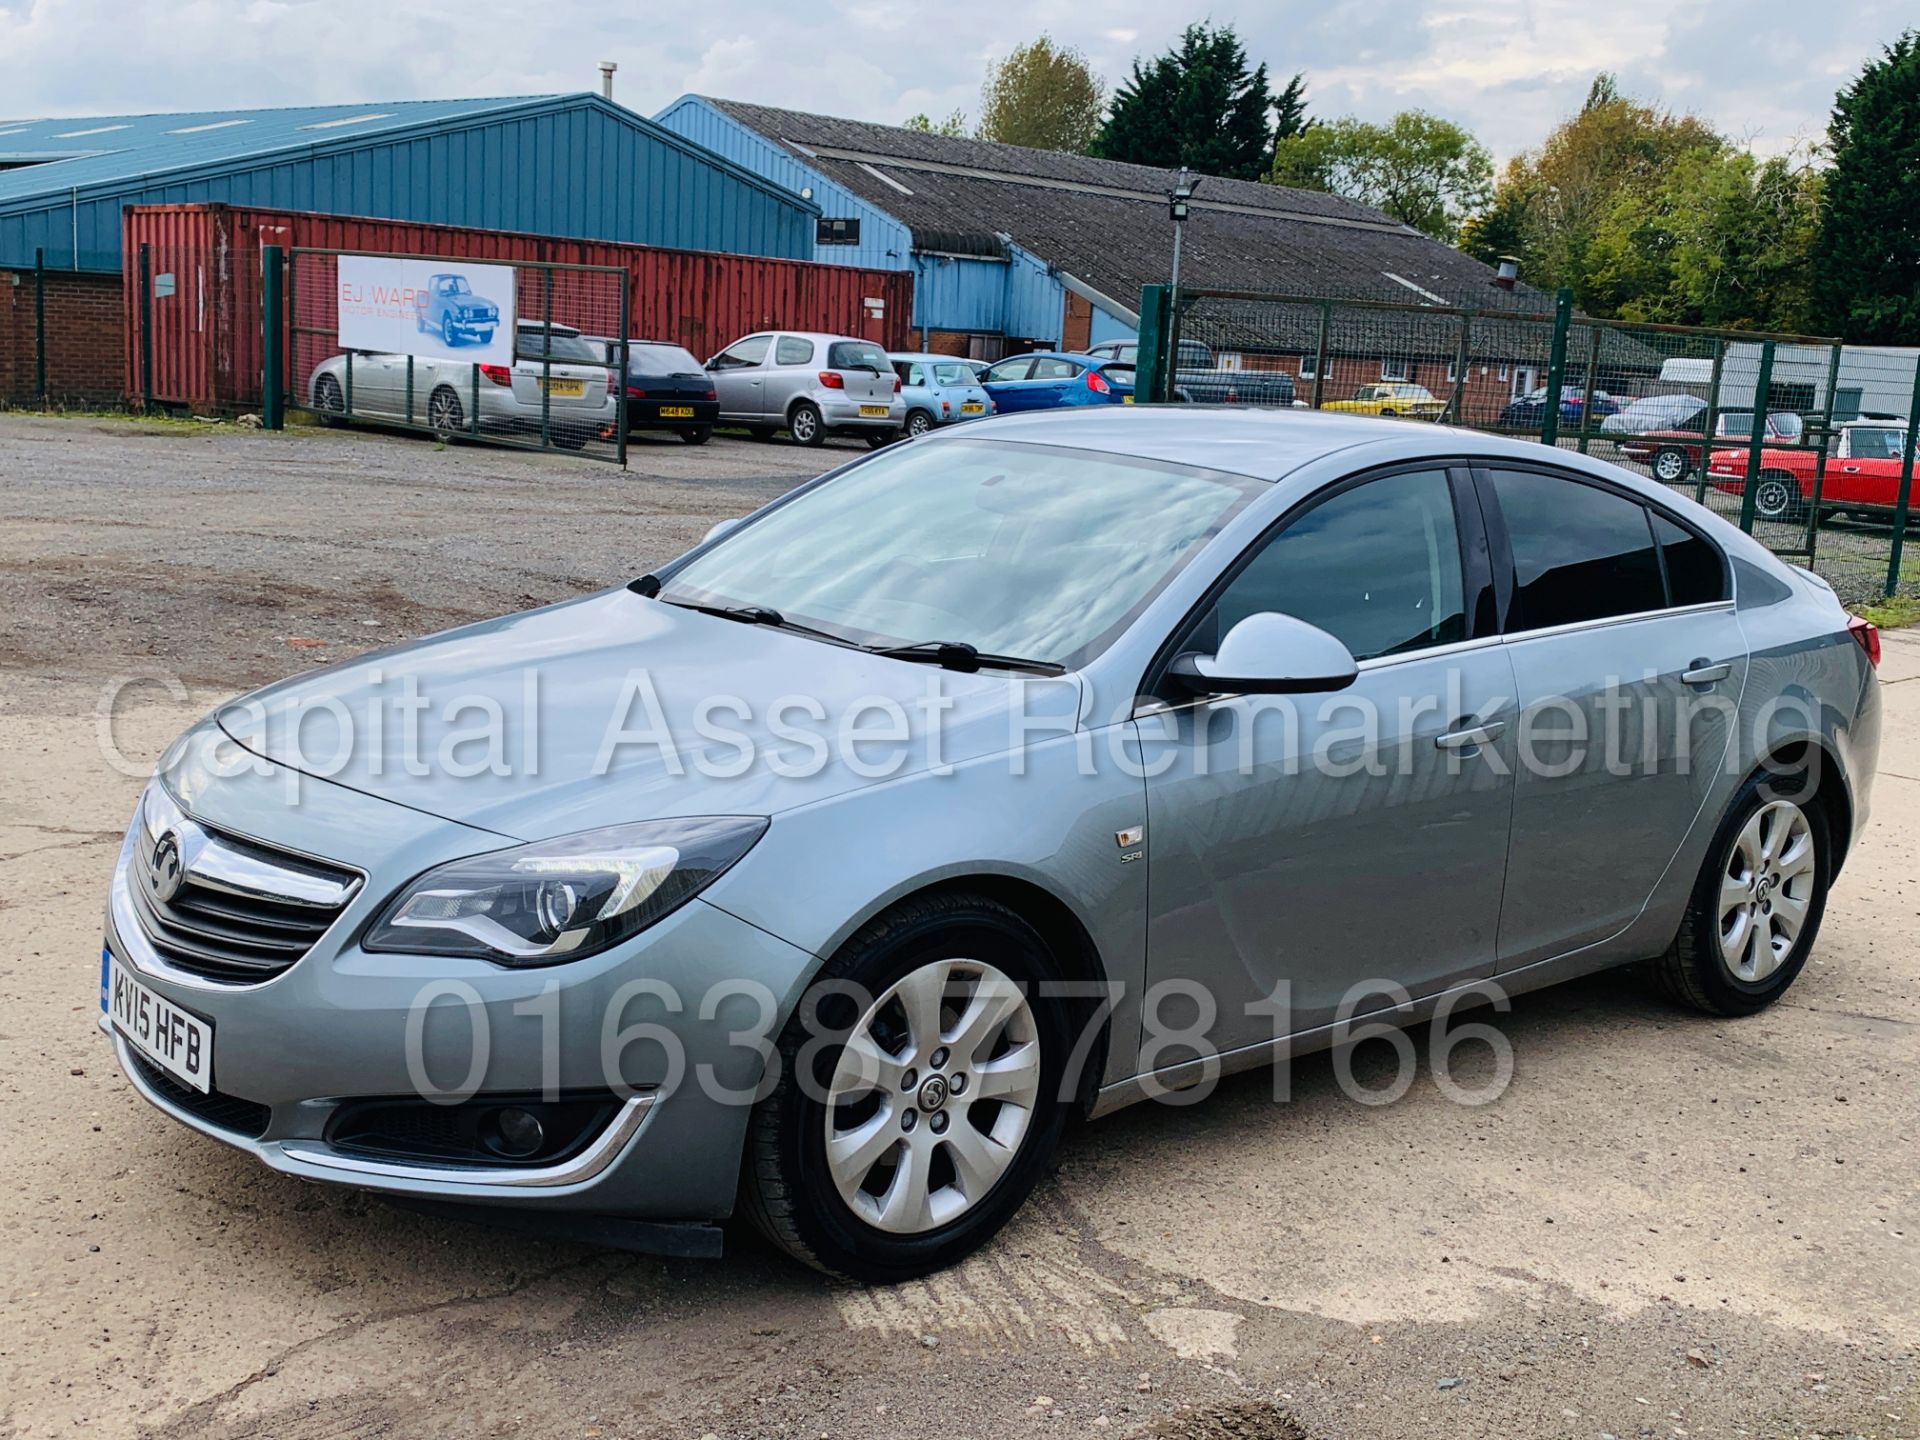 VAUXHALL INSIGNIA *SRI EDITION* (2015 - NEW MODEL) '2.0 CDTI - STOP/START - 6 SPEED' (1 OWNER) - Image 7 of 40